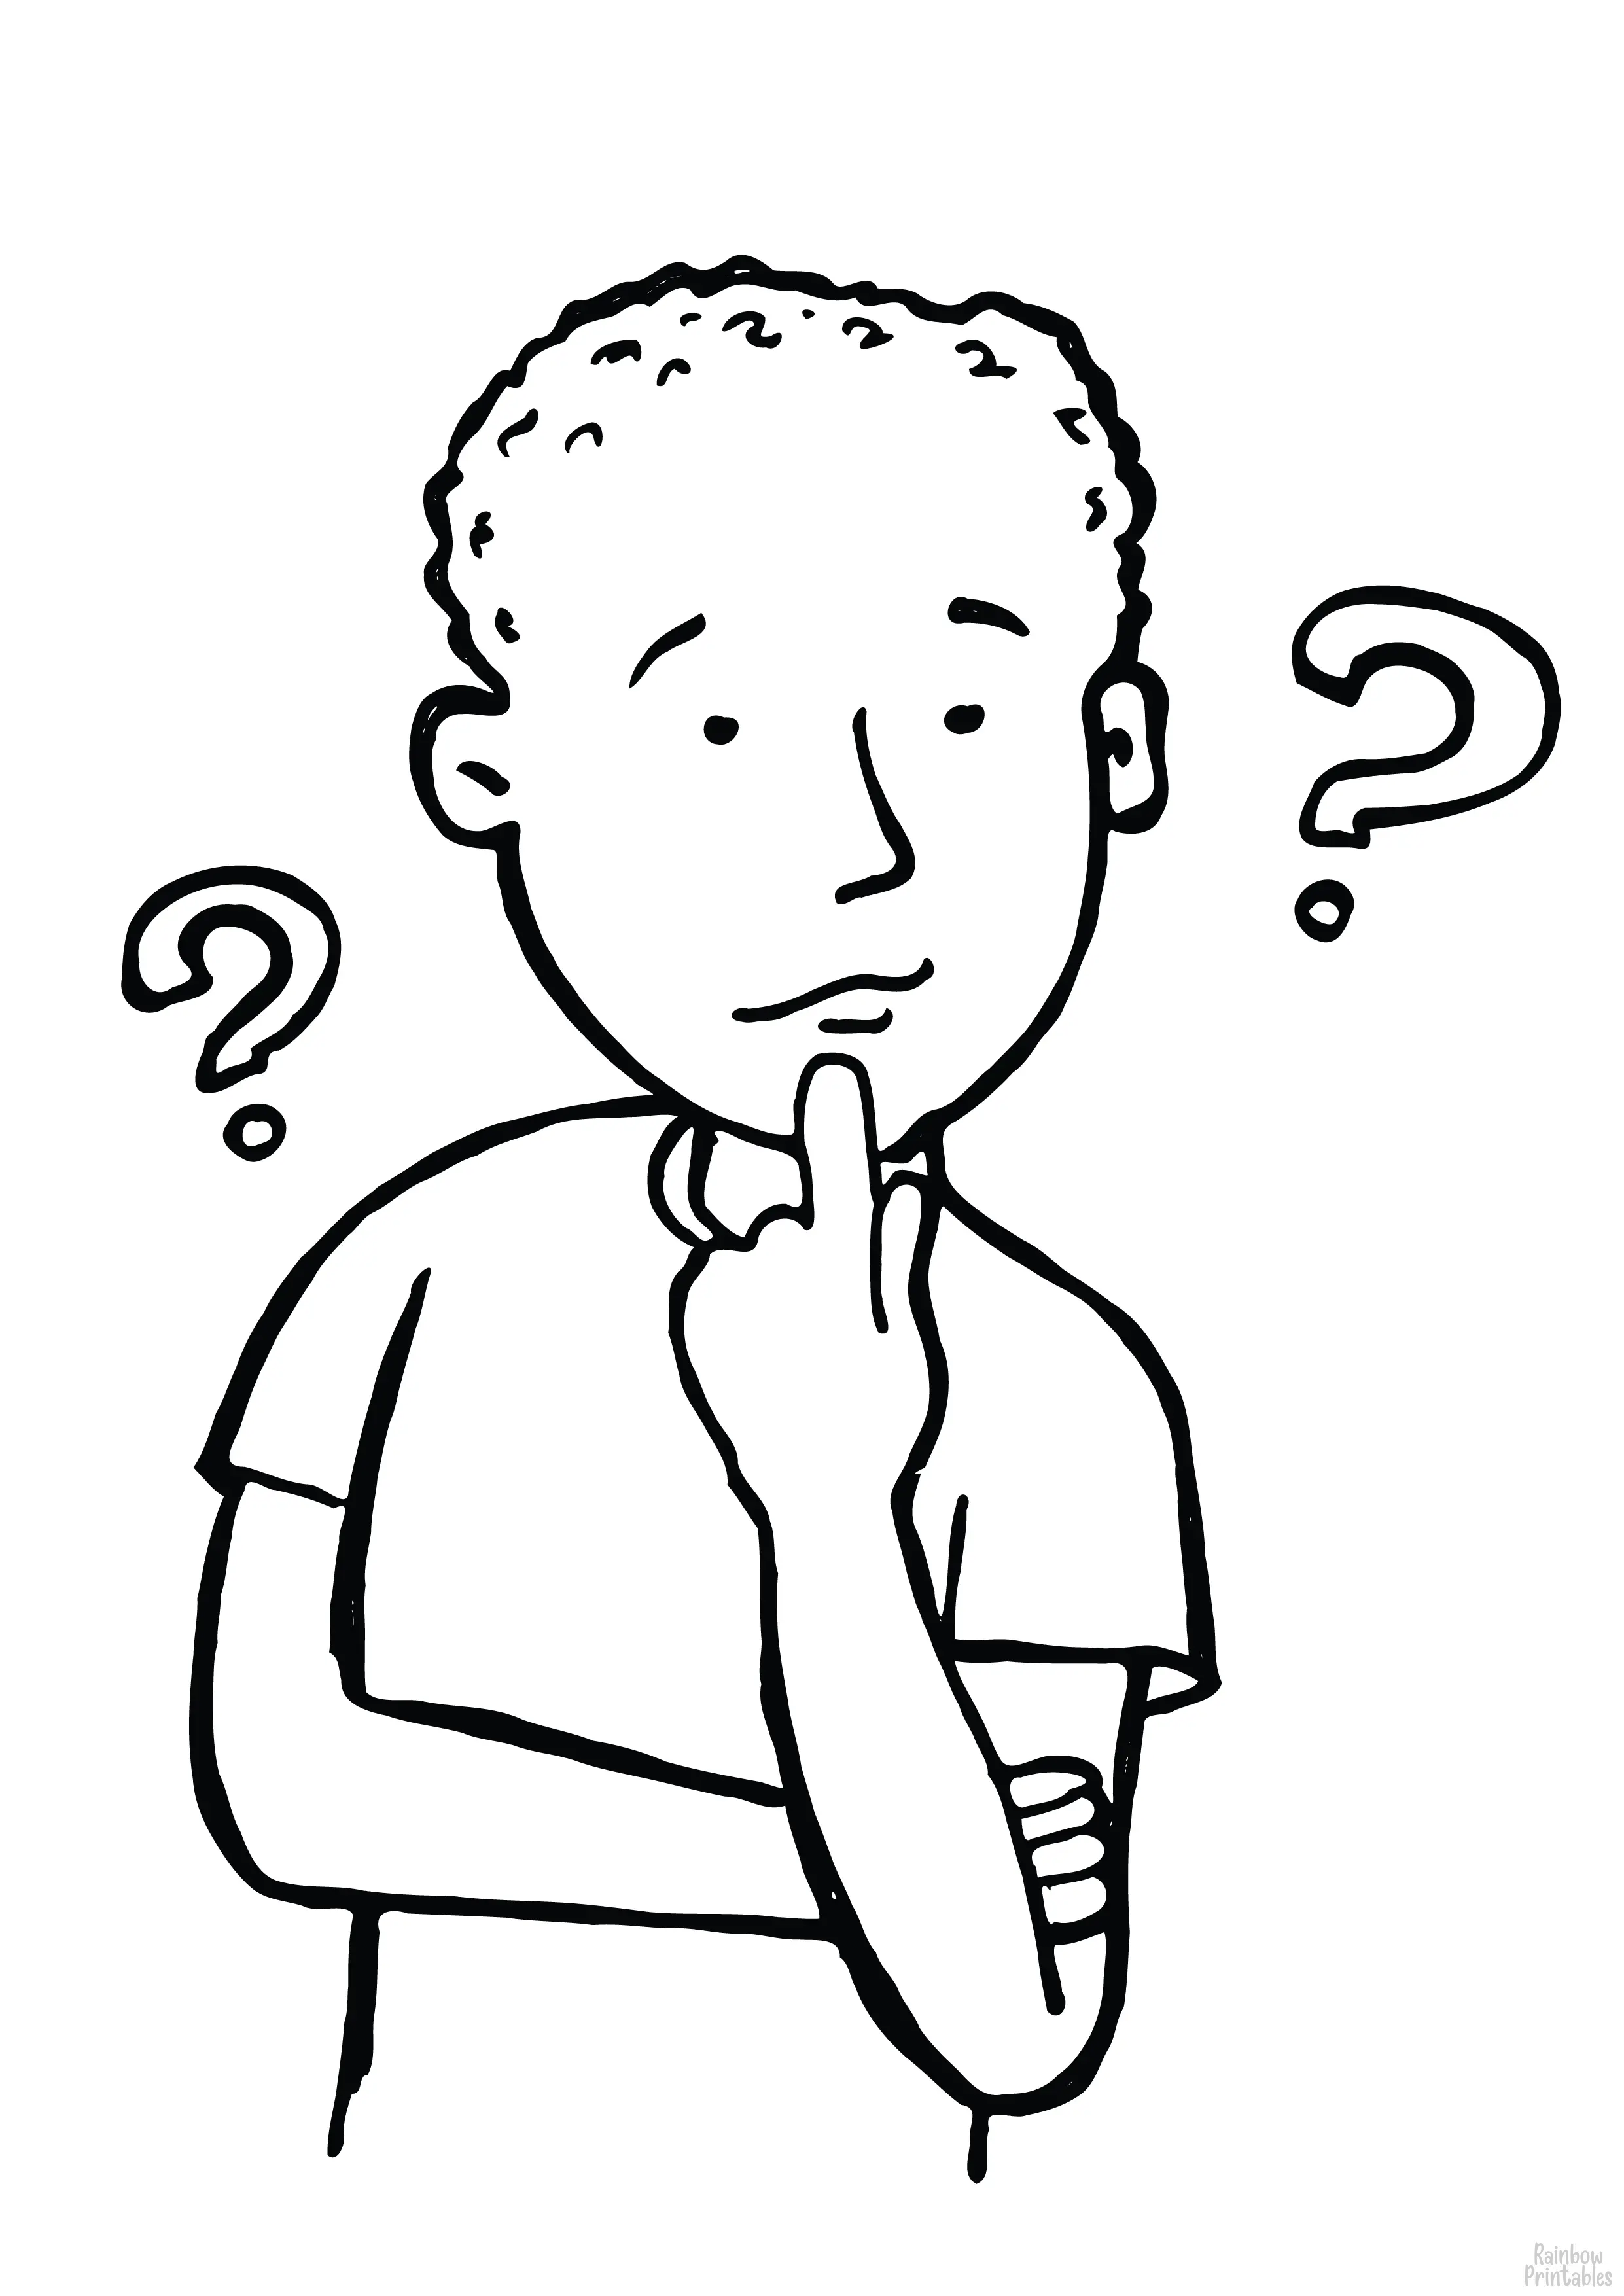 BOY WITH QUESTION Player Free Clipart Coloring Pages for Kids Adults Art Activities Line Art